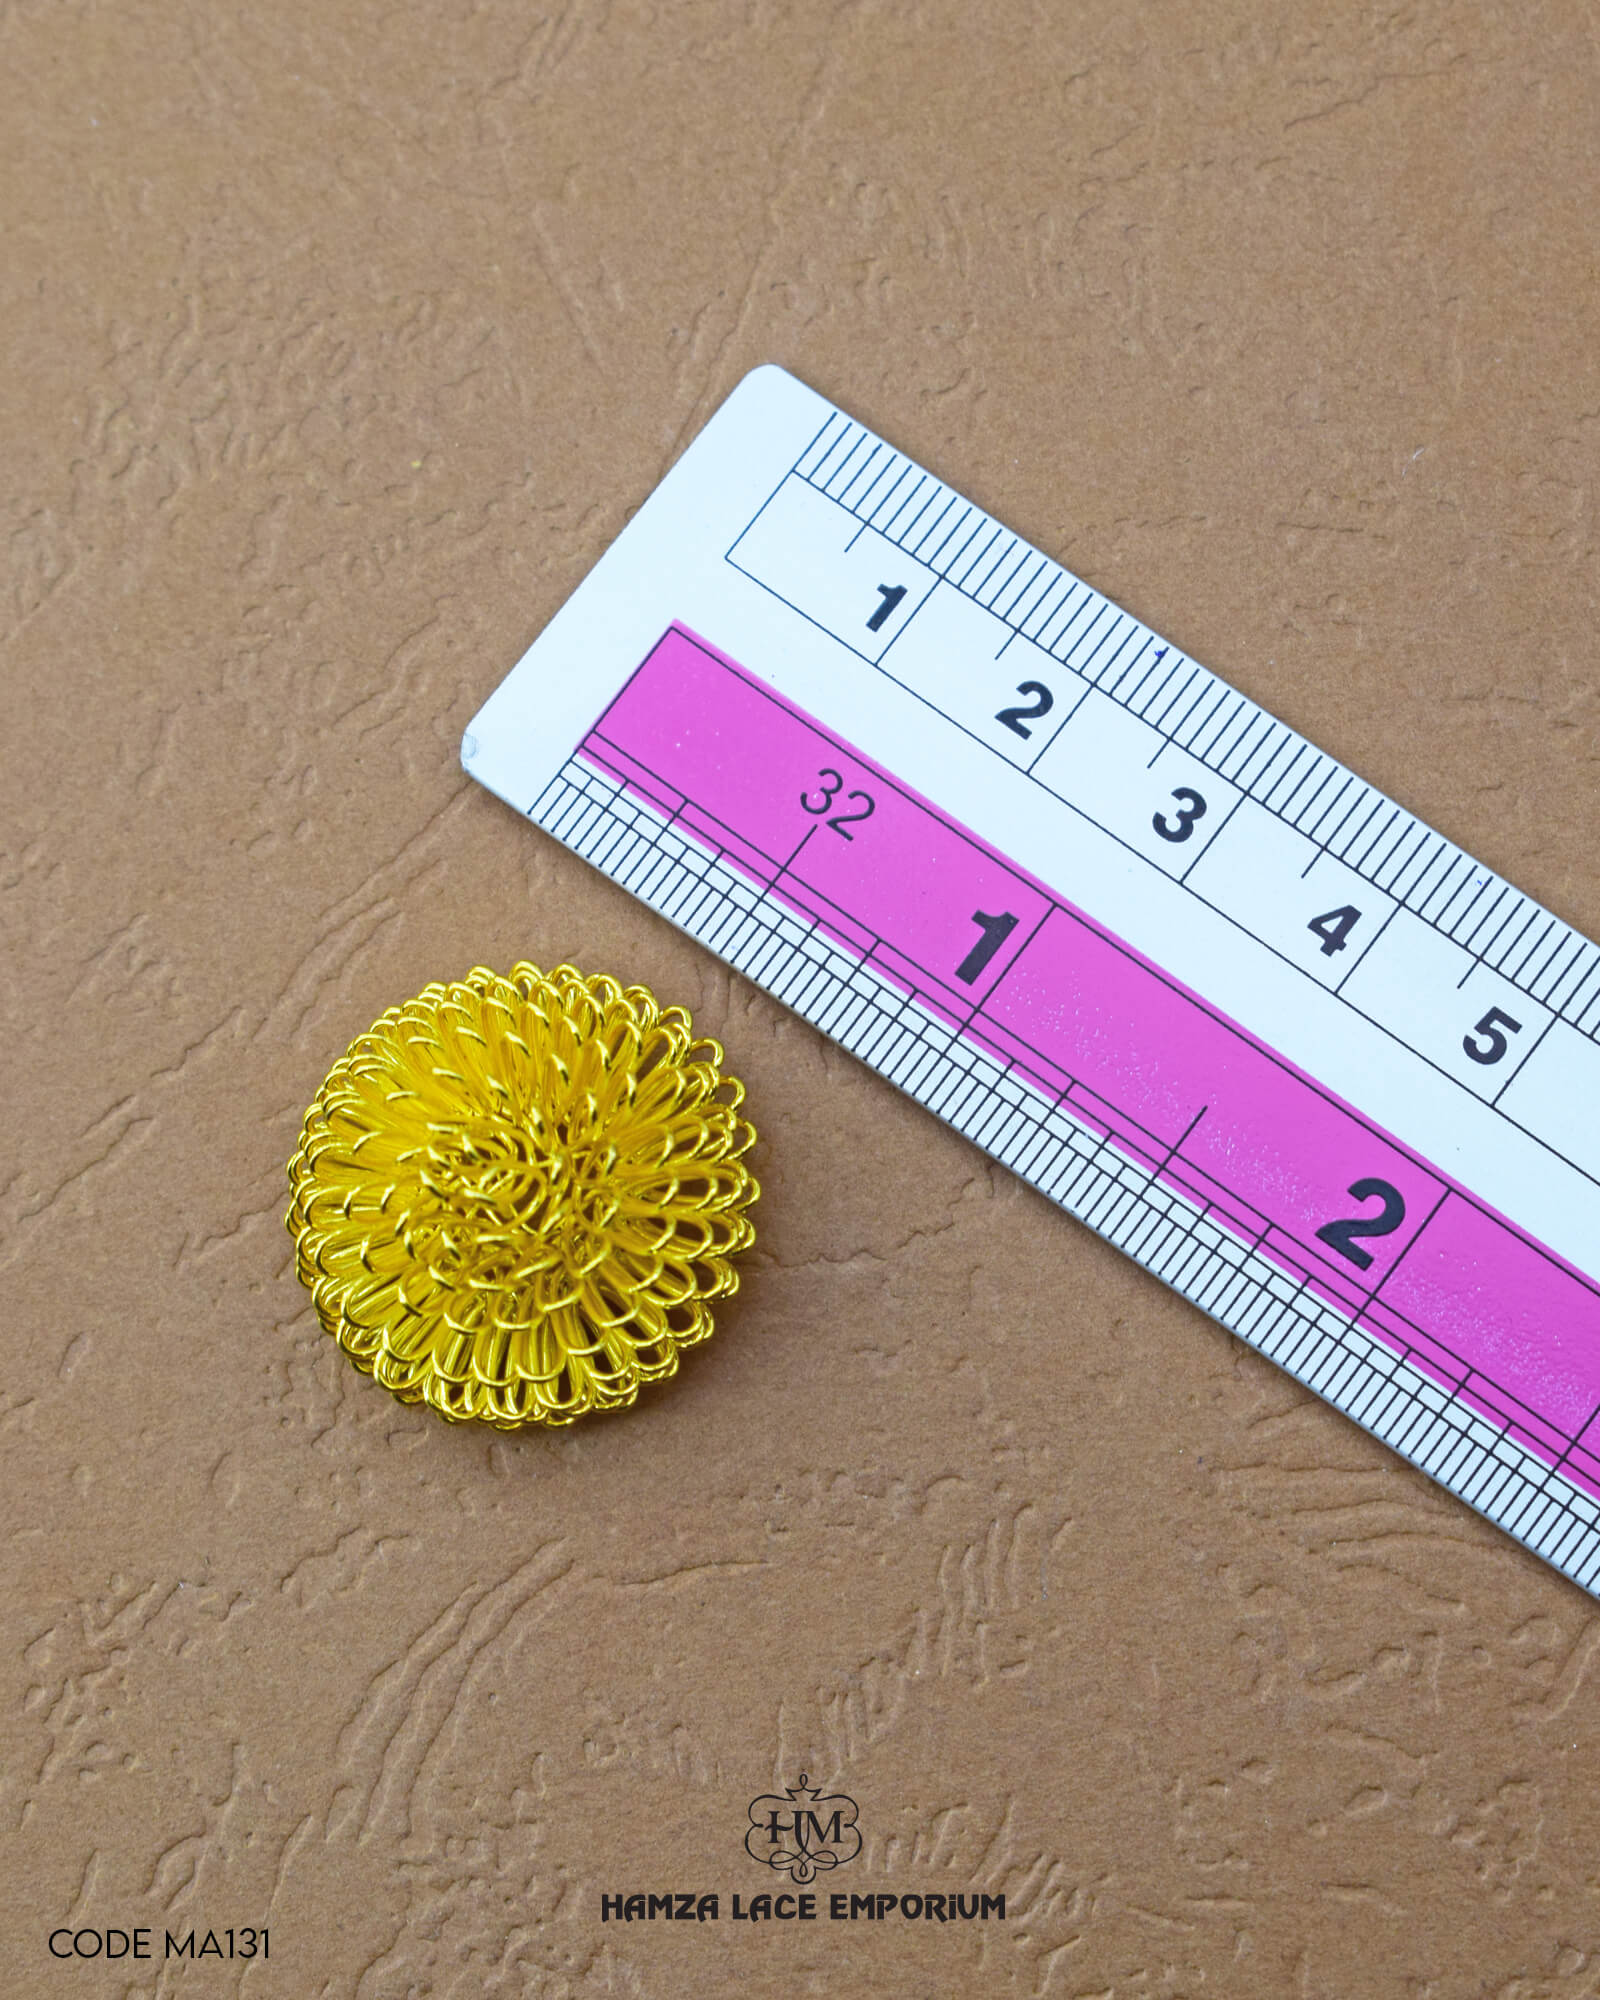 The 'Flower Design Metal Accessory MA131' size is showcased using a ruler for precise measurement.